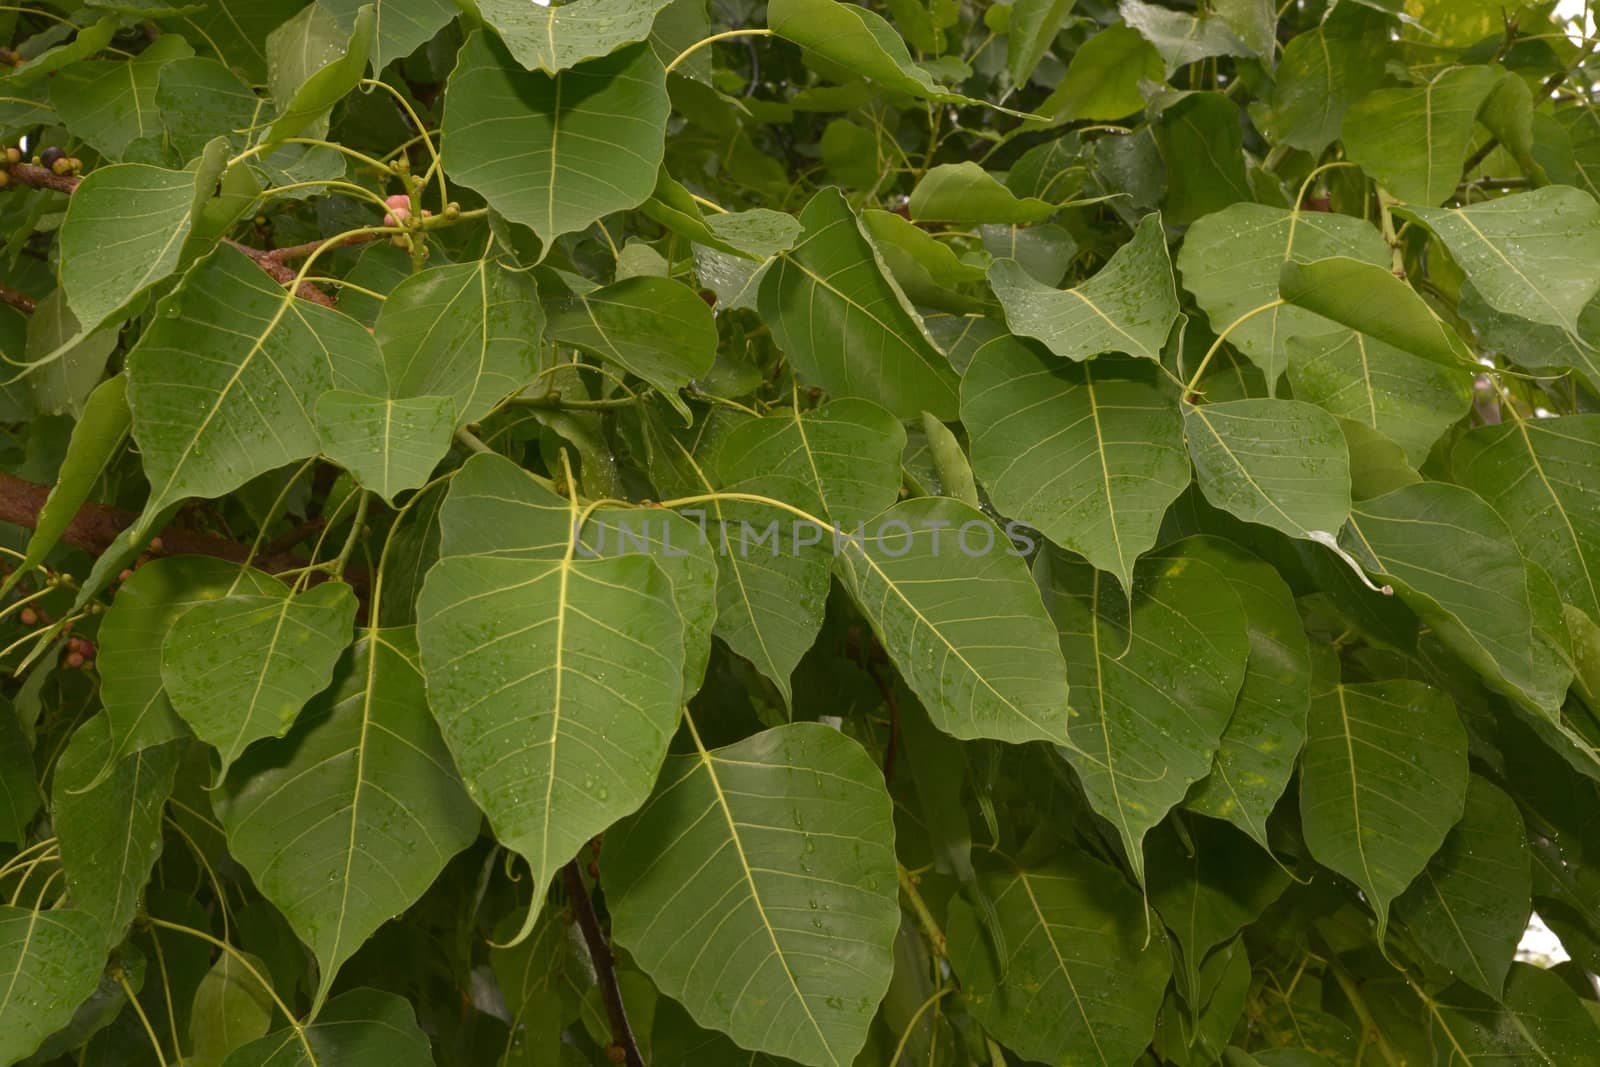 Bodhi Tree Green Leaves, Bodhi Tree is recognizable by its heart-shaped leaves, which are usually prominently displayed.